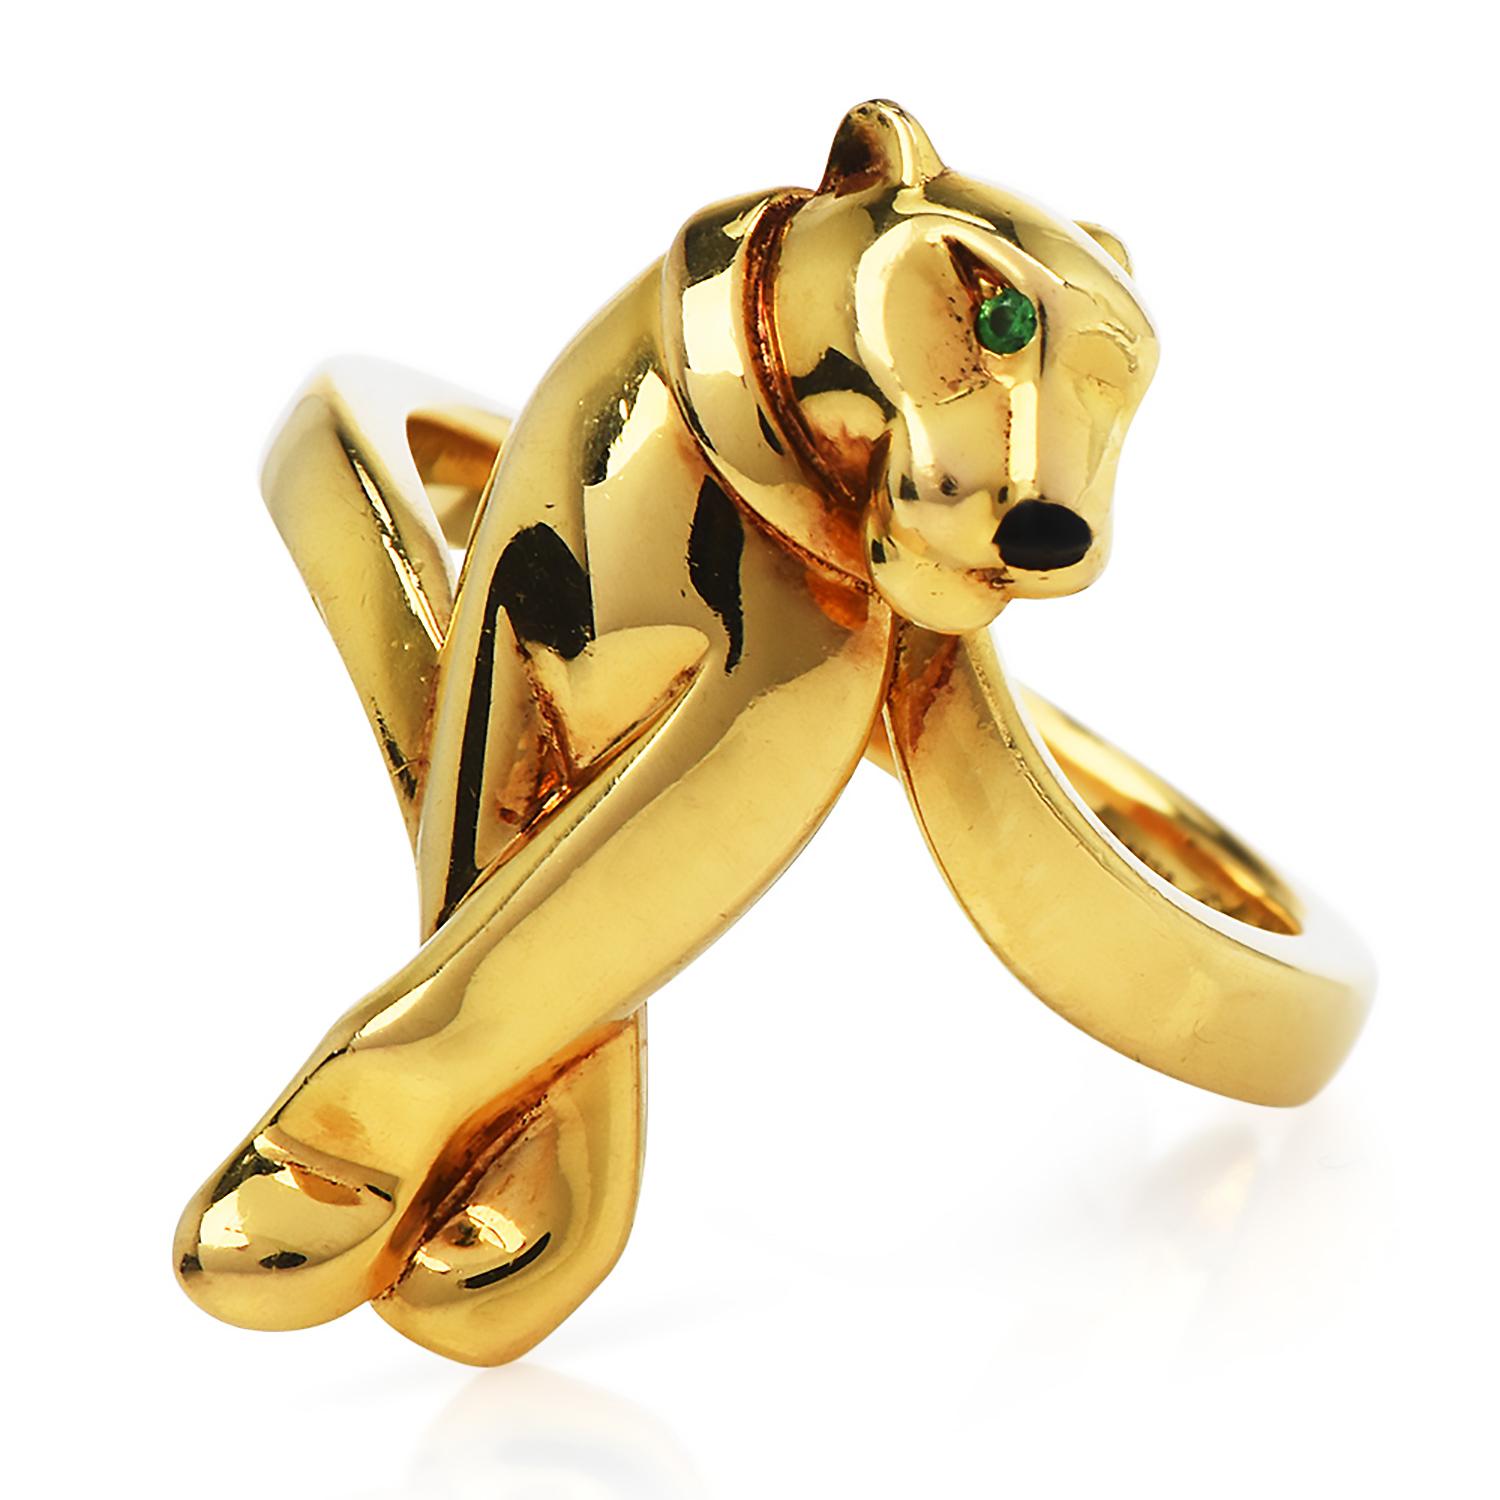 Cartier Panthere 18K  Gold Panther Design Cocktail Ring from the collection of Cartier Panthere de Cartier.

This outstanding example of Cartier's timelessness has a panther as the center of attention.

18K Yellow Gold Panthere Ring by Cartier.

Two